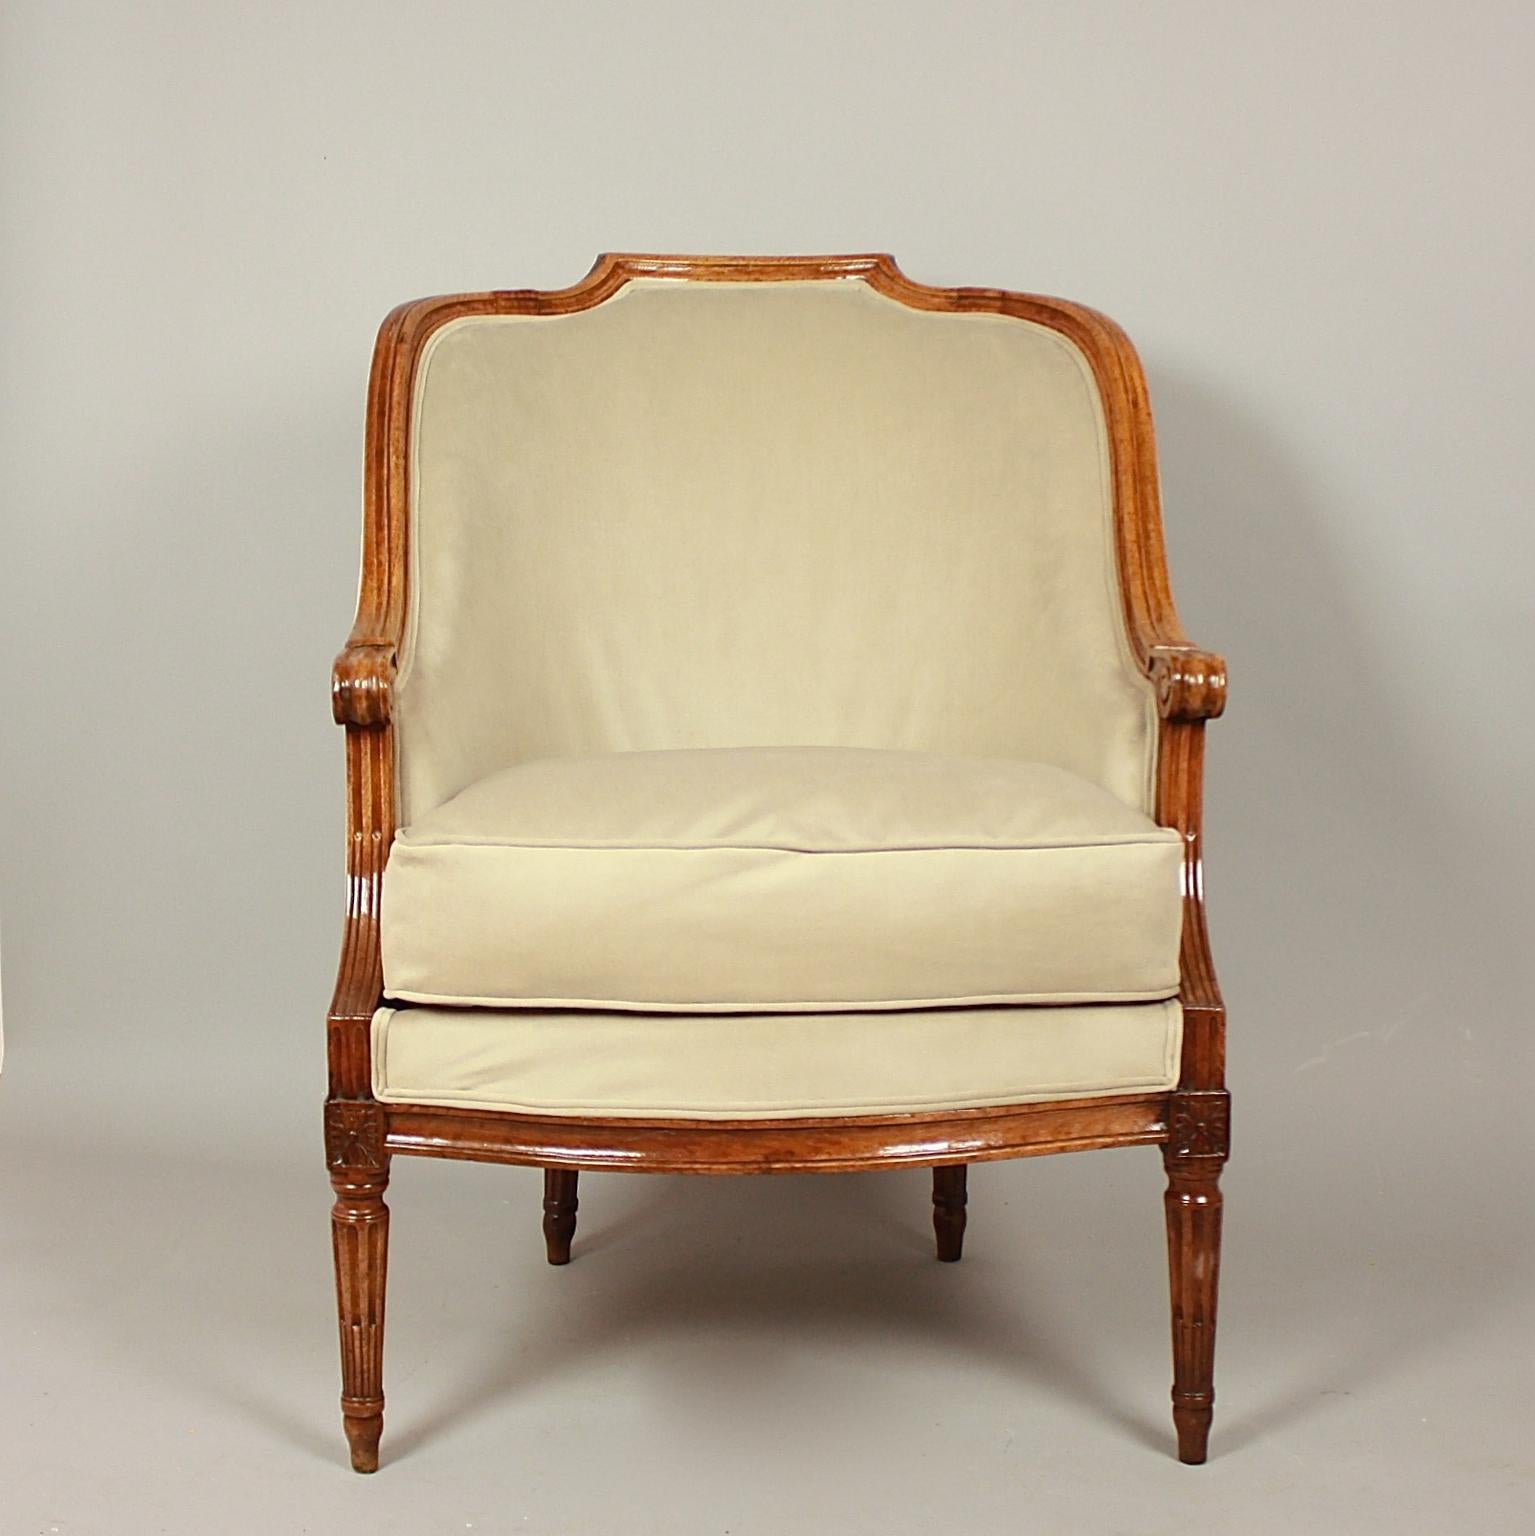 Late 18th Century Pair of Louis XVI Walnut Bergeres or Armchairs, French, circa 1780